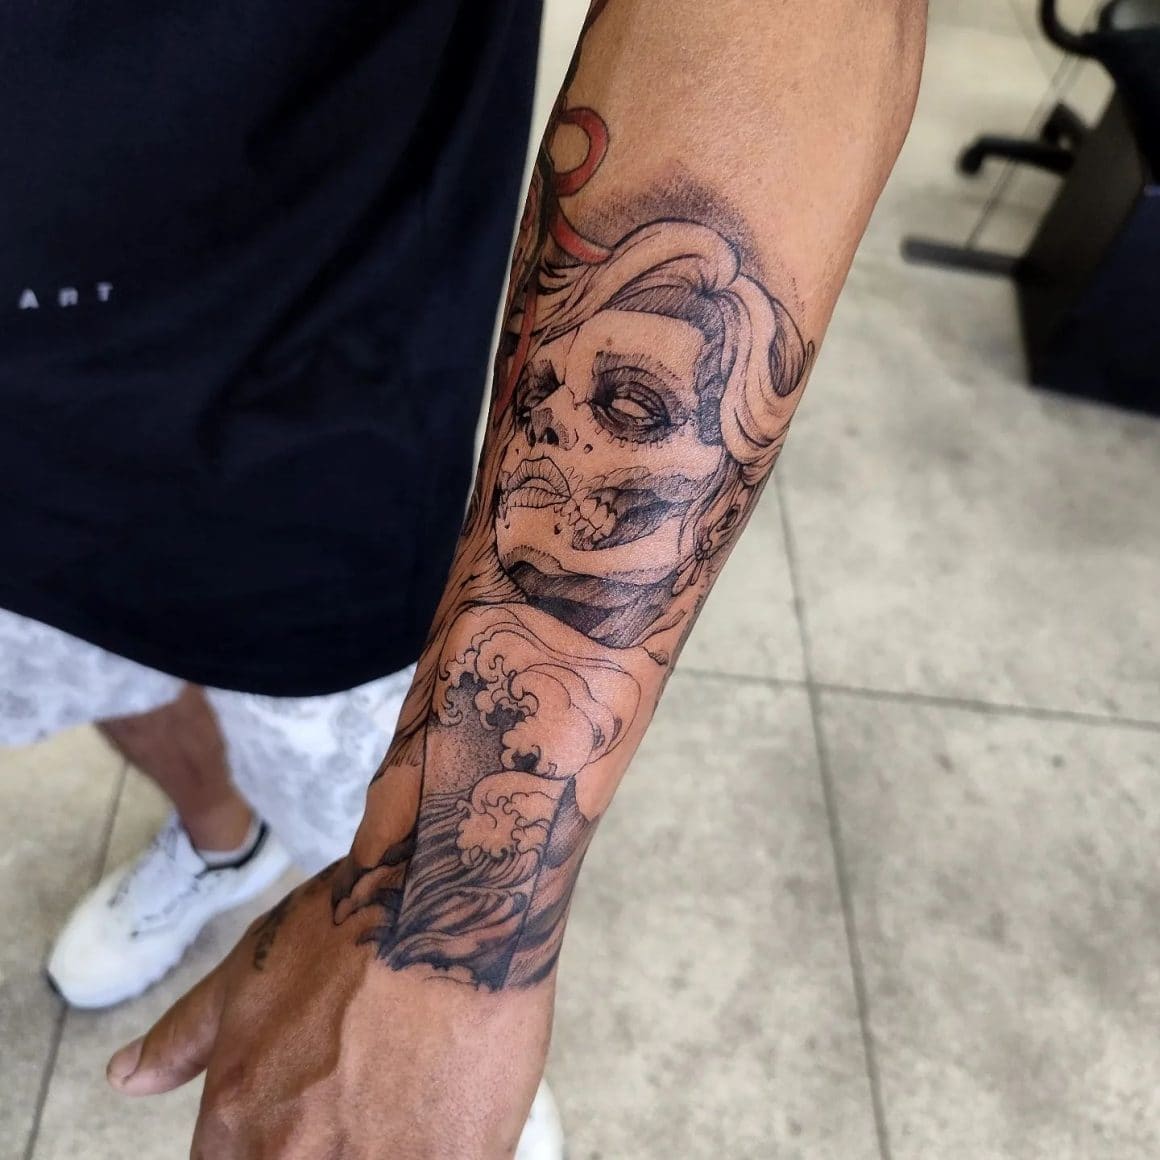 Santa Muerte Tattoos: The Meaning Behind This Powerful Design